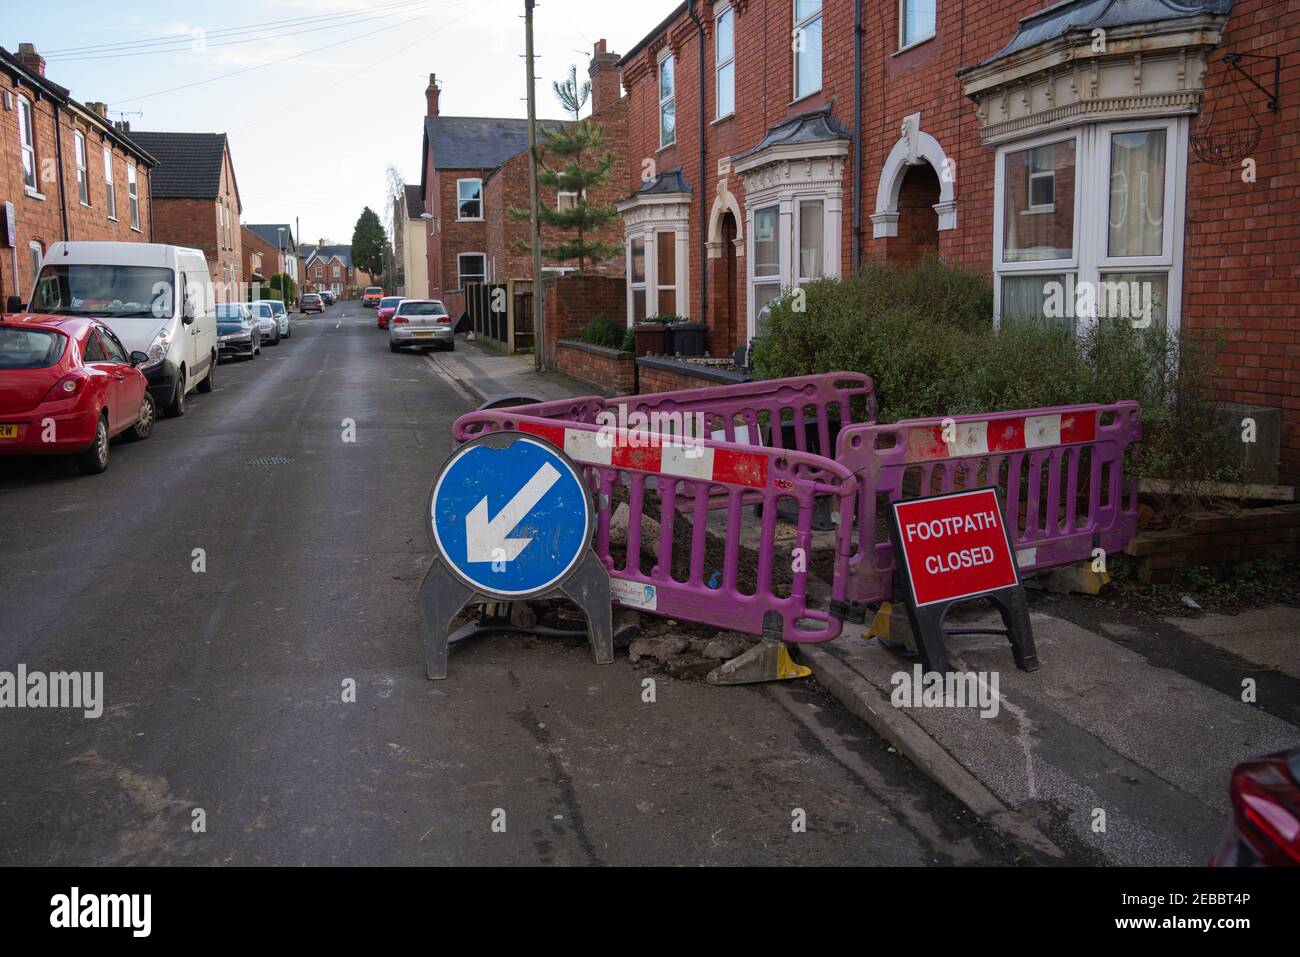 Local road works, footpath closed, safety, operator's, narrow to permit pedestrians, blocked access, barriers, disabled ramp access, kerb, gas works. Stock Photo